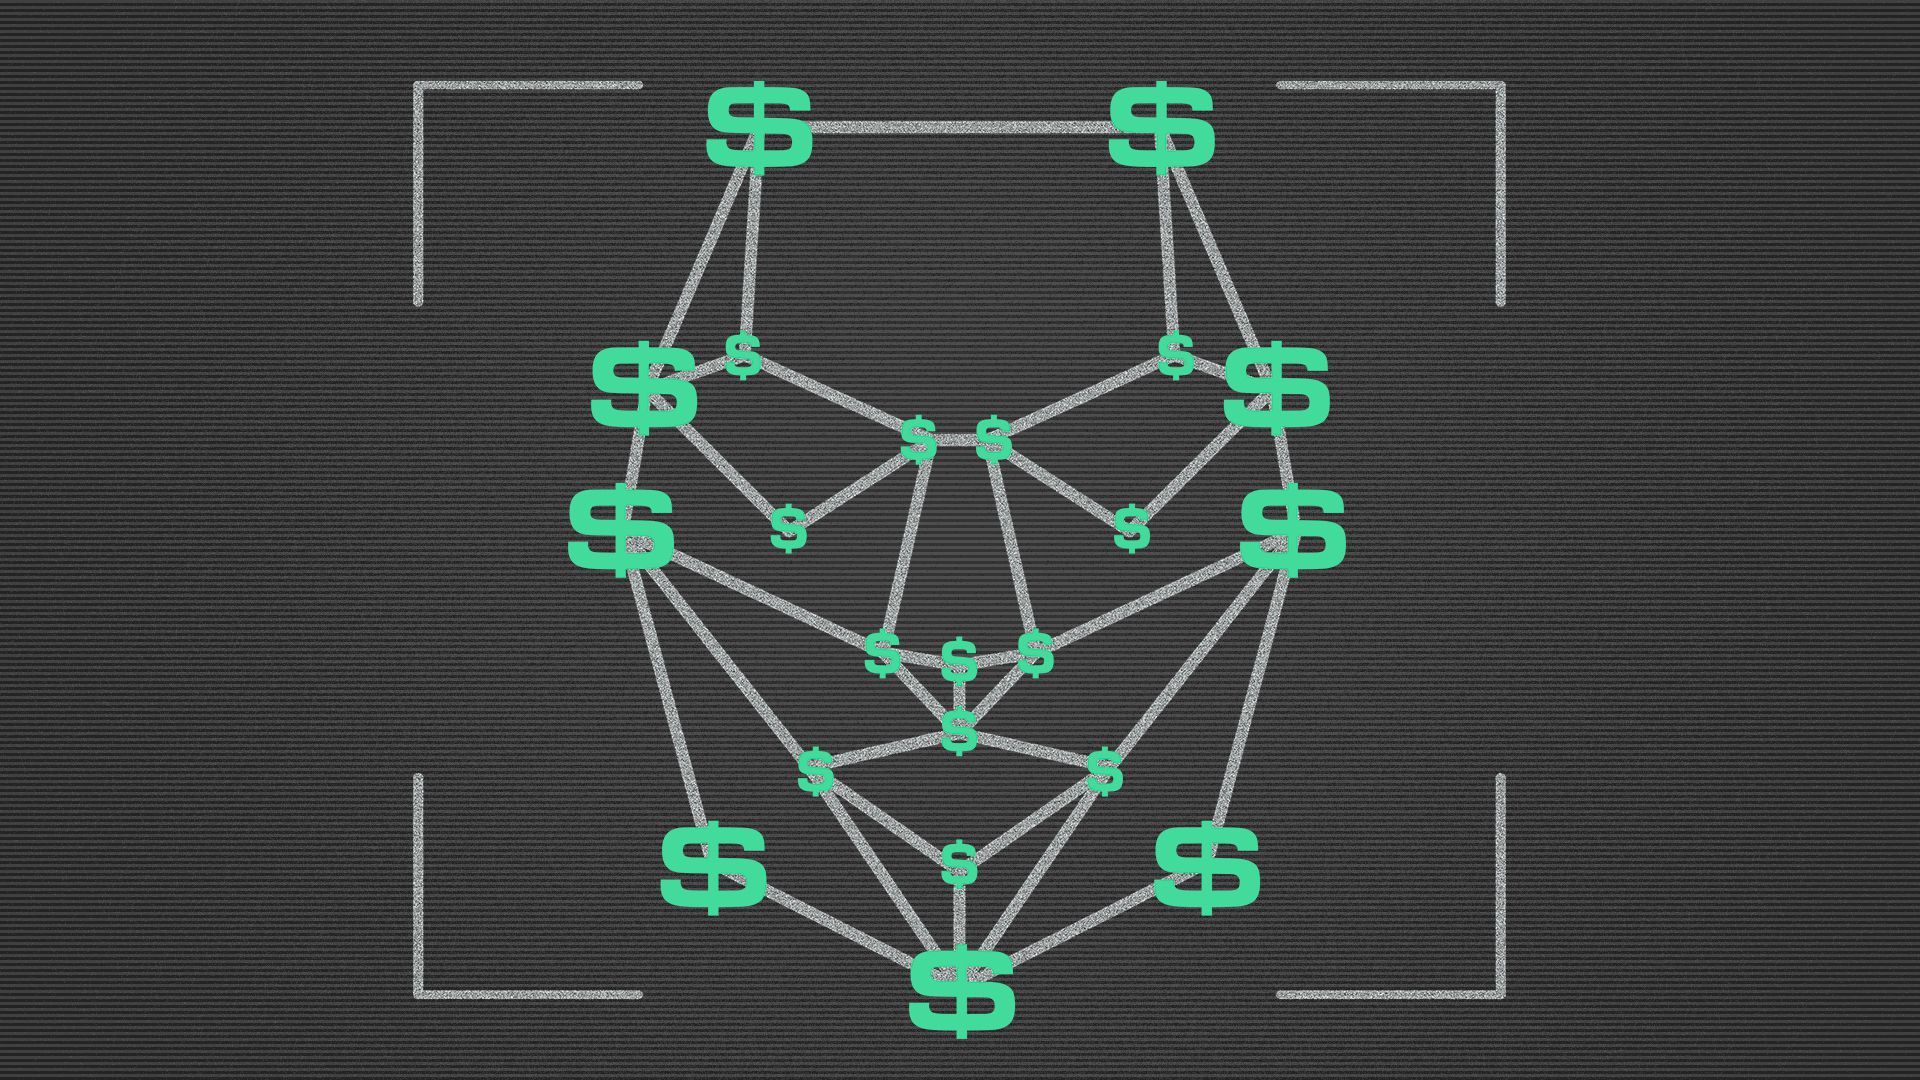 Illustration of a facial recognition grid with dollar signs at the points. 